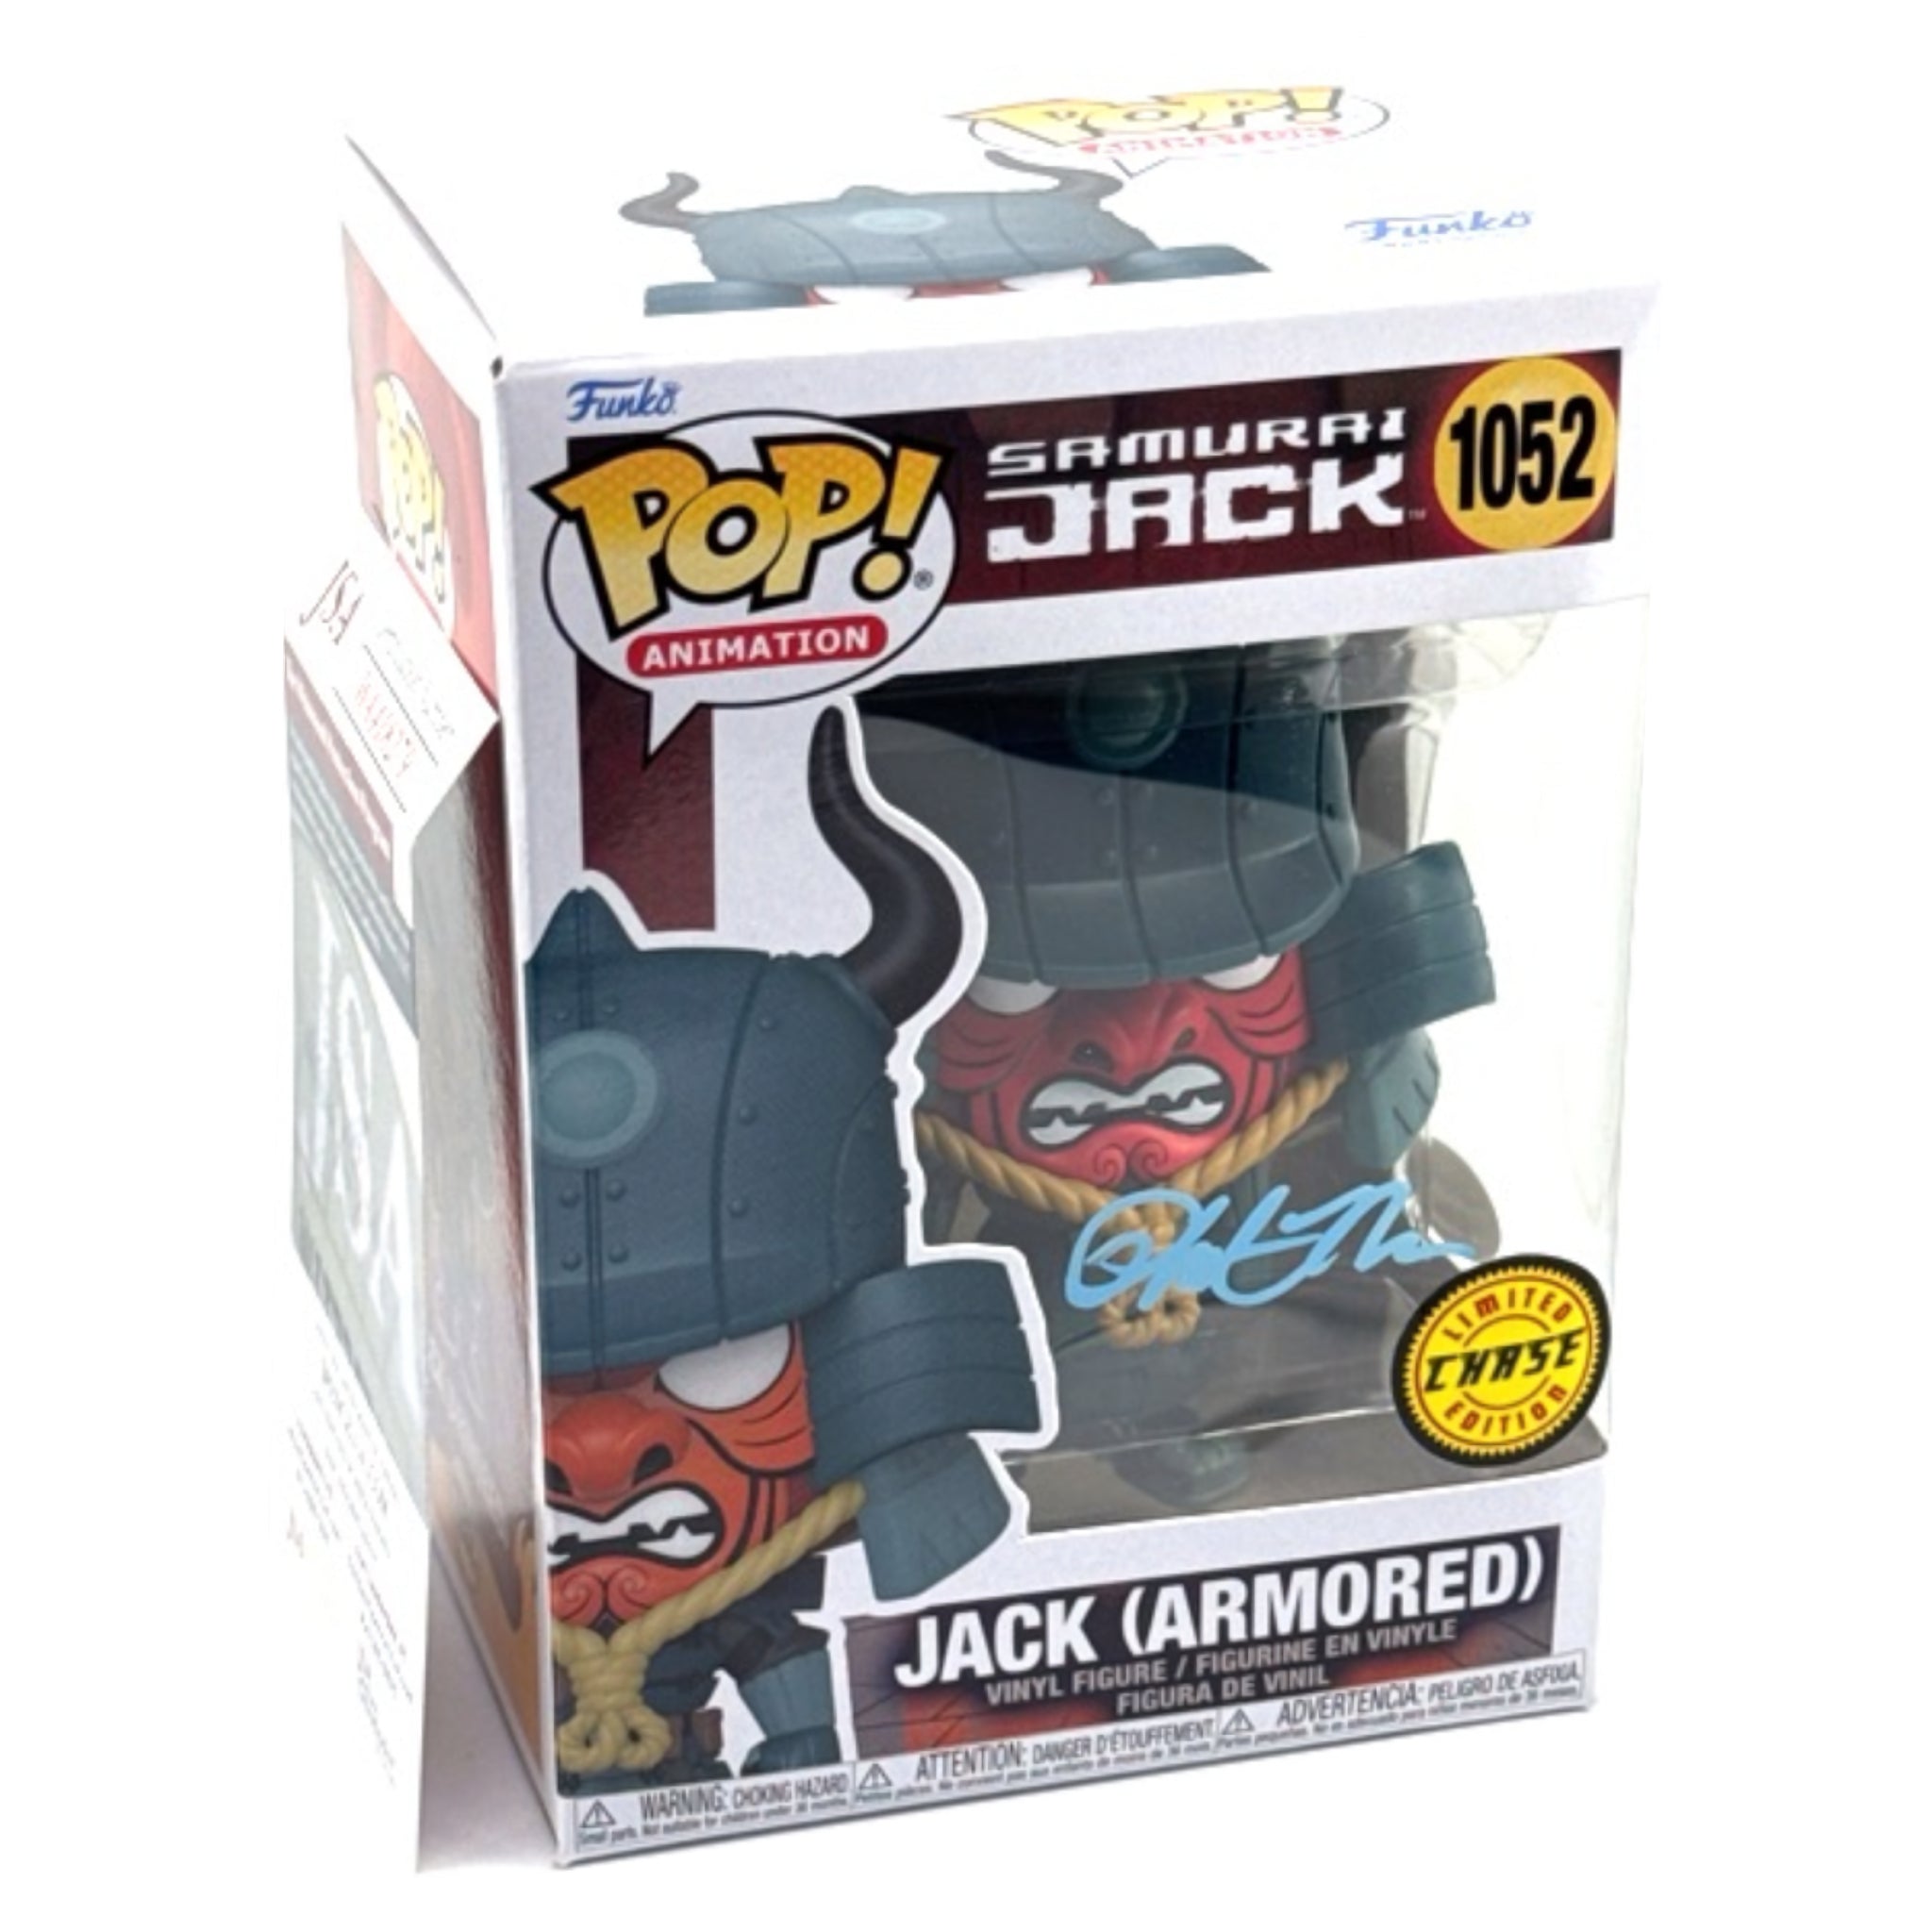 Jack (Armored) (Signed by Phil LaMarr) Funko Pop! CHASE